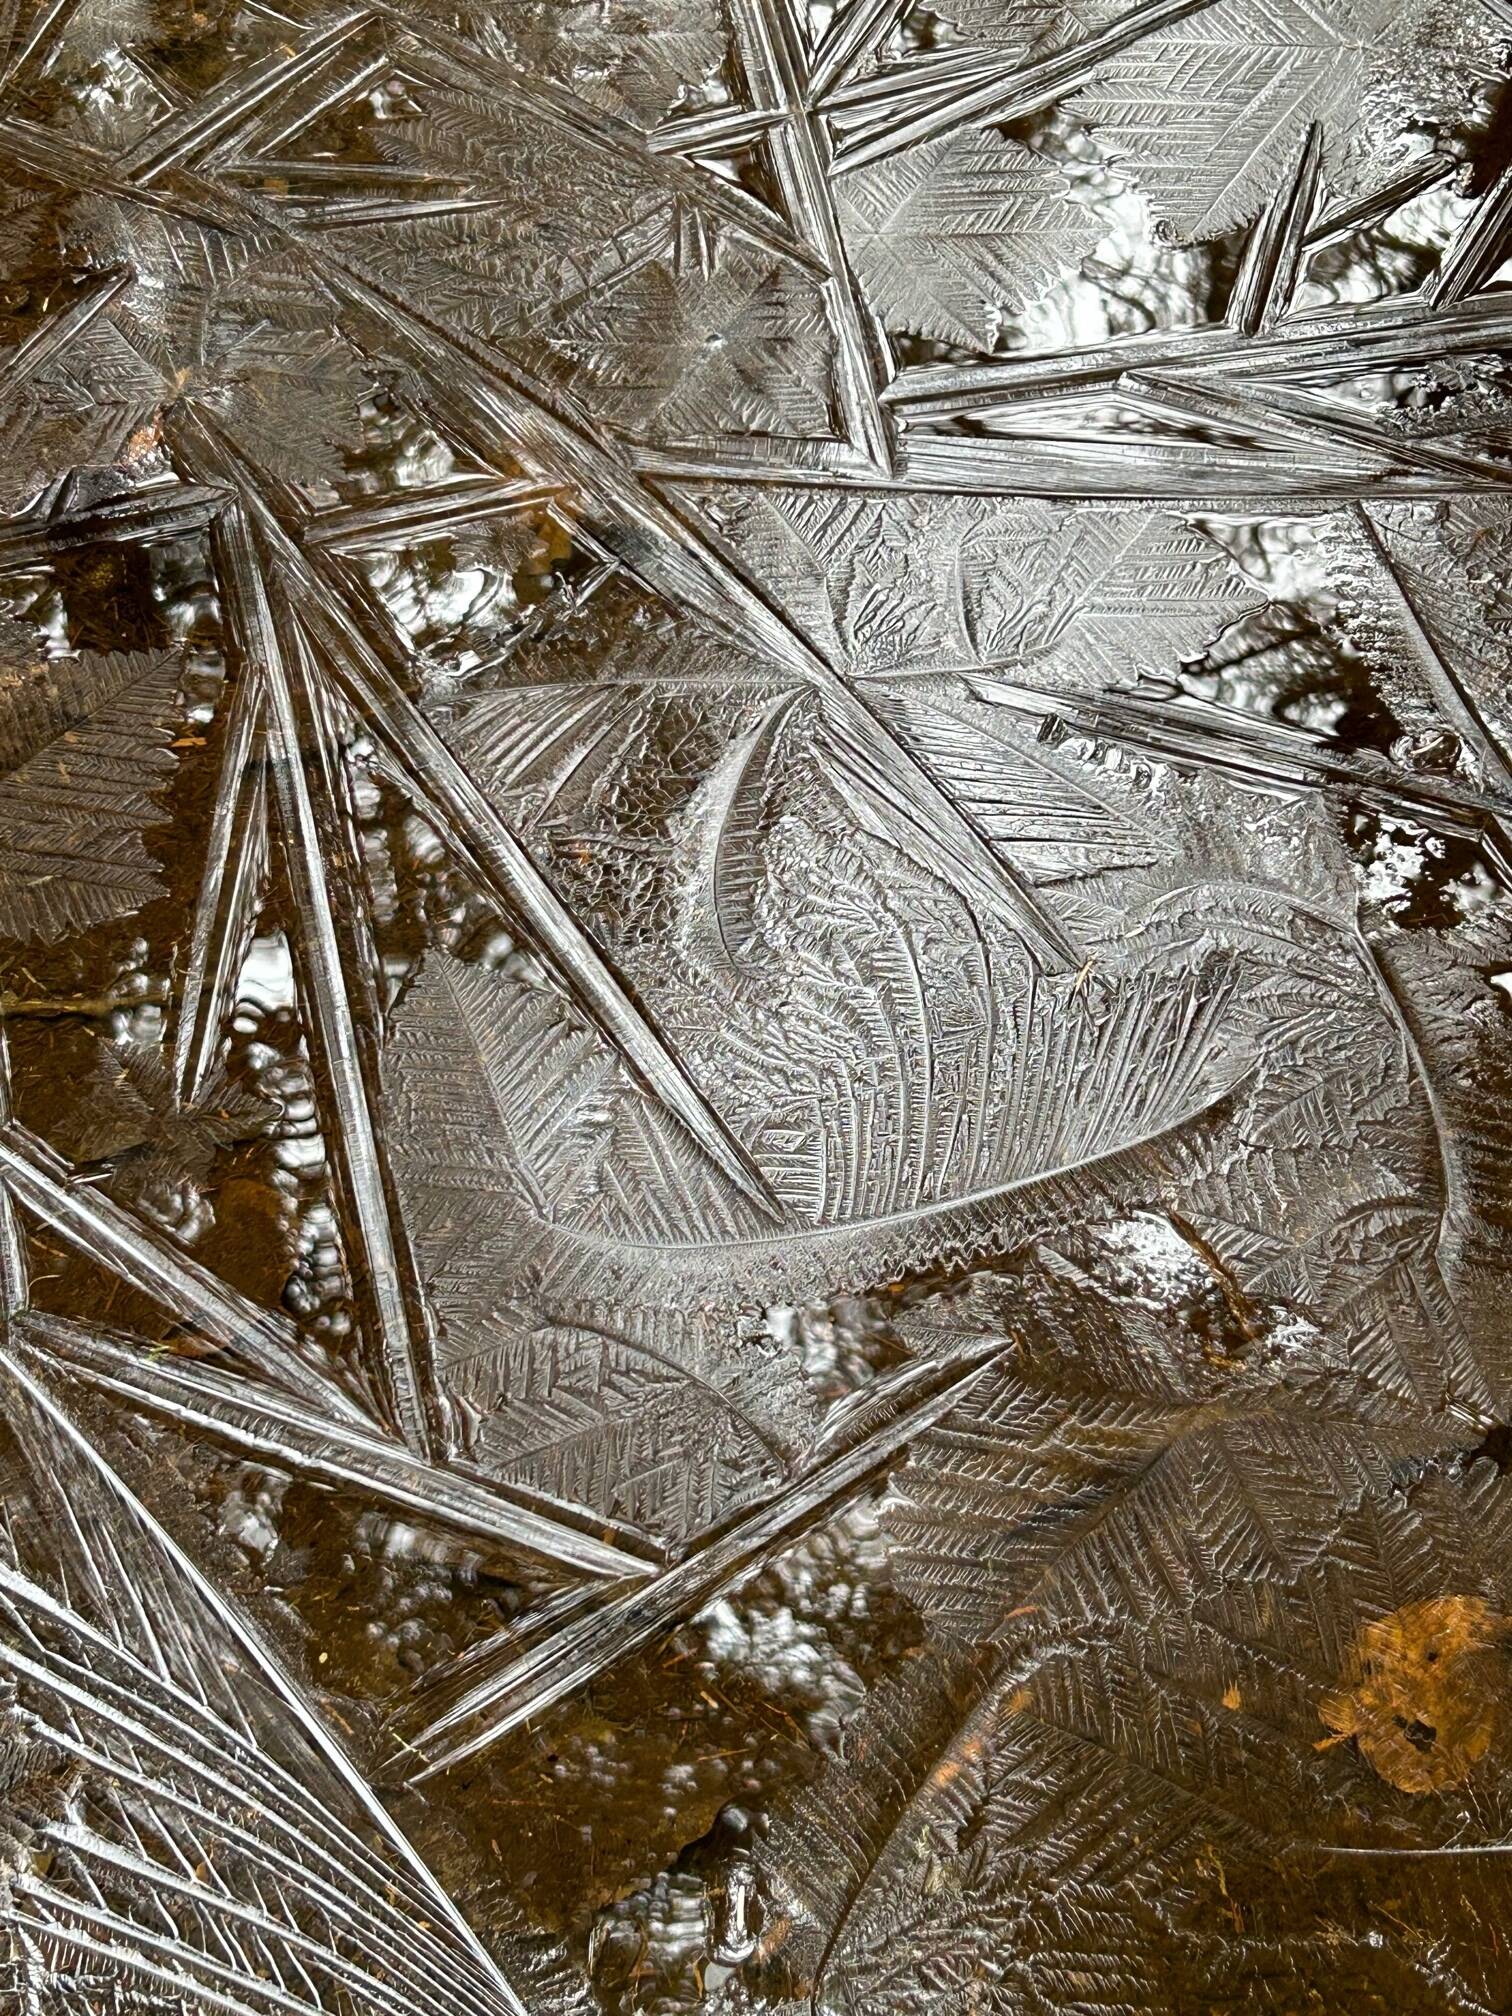 Fern and feather ice along the East Glacier Trail on Nov 29. (Photo by Deborah Rudis)